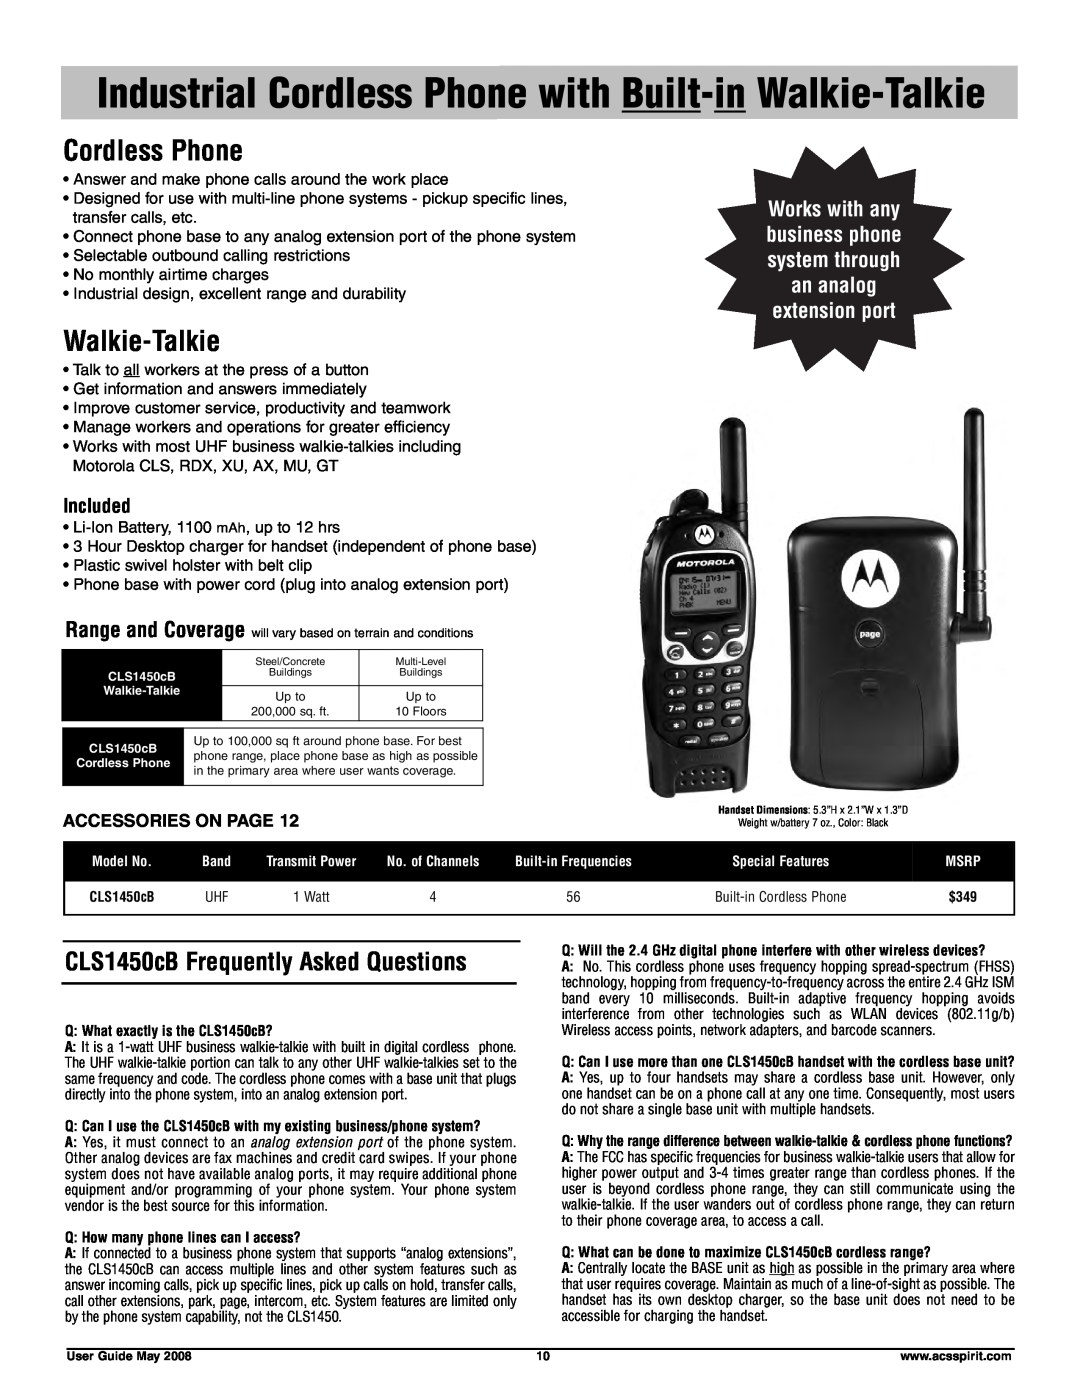 Motorola RDV5100 Industrial Cordless Phone with Built-in Walkie-Talkie, CLS1450cB Frequently Asked Questions, Included 